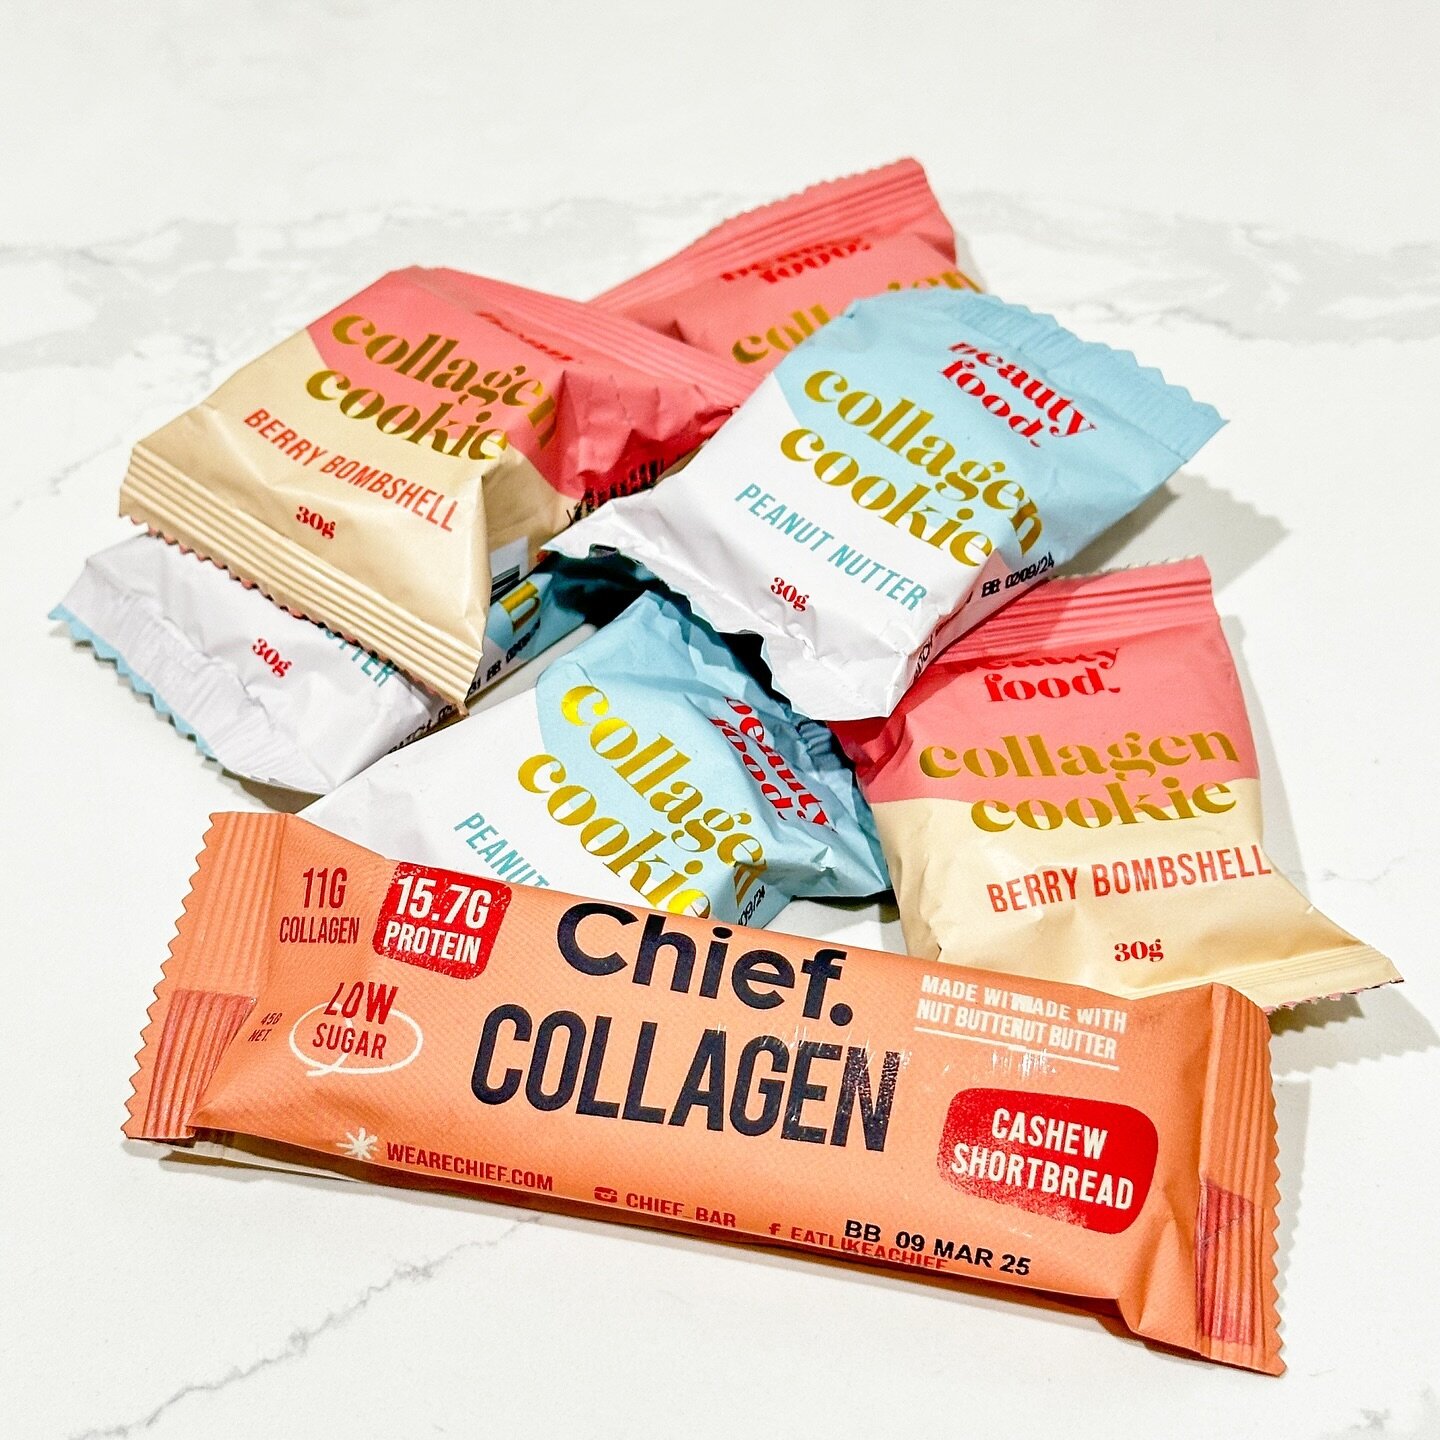 The incredible Chief Nutrition Collagen bars fuelling the Currumbin Cockatoos for their local race day ✨ 

#collagen #fuelyourbody #athletebars #chiefnutrition #currumbincockatoos #goldcoastsmallbusiness #slsc